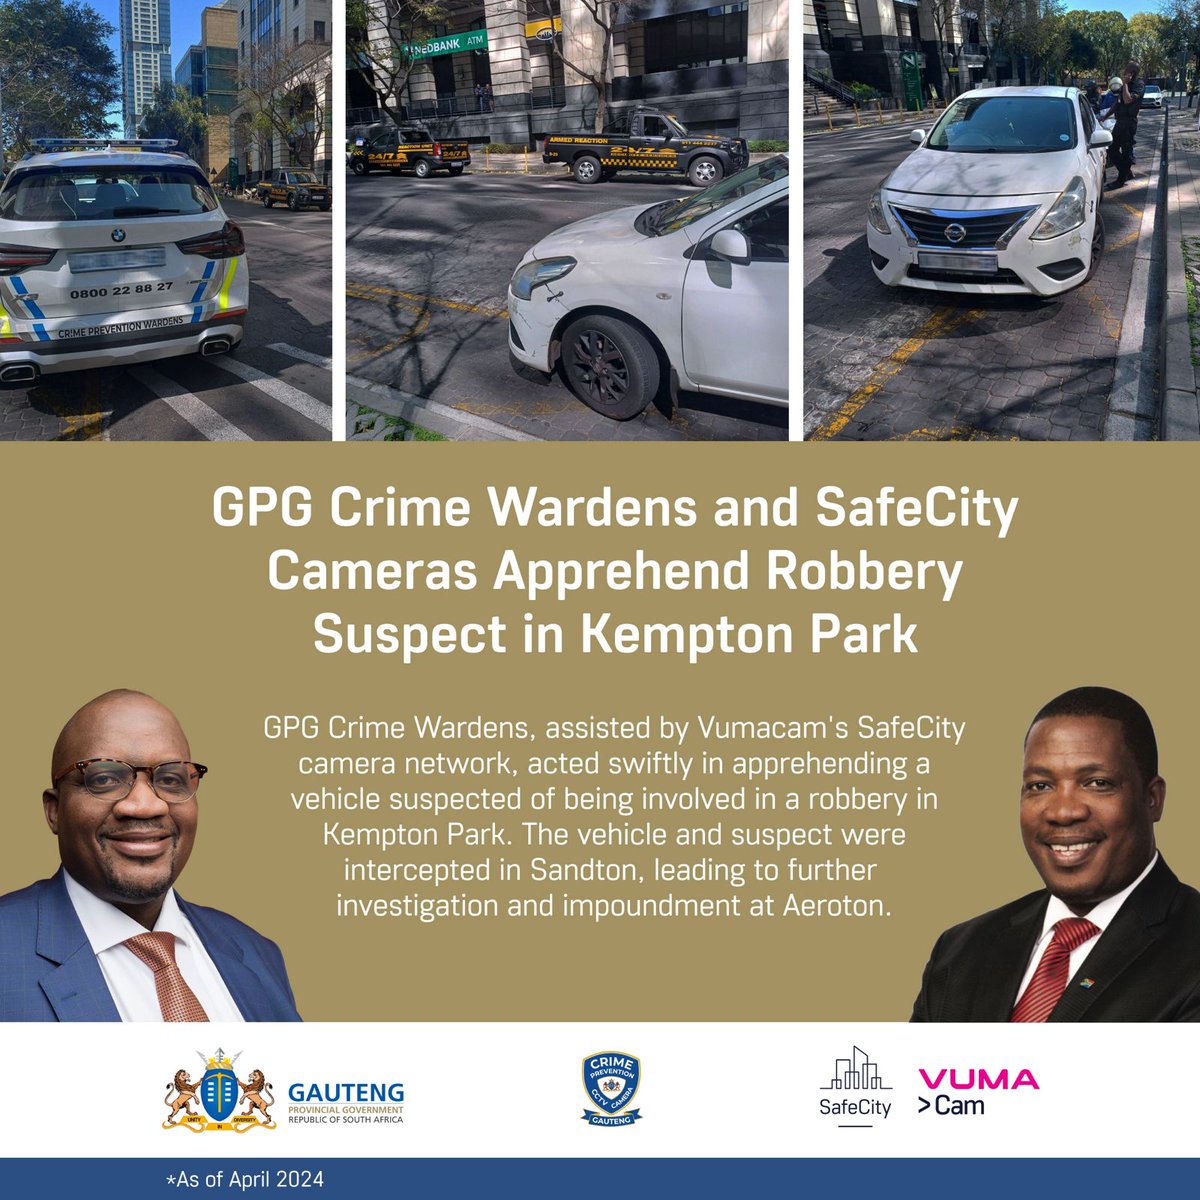 In a remarkable display of collaboration, @GautengProvince Crime Wardens, supported by Vumacam's SafeCity camera network, swiftly acted upon identifying a vehicle suspected of involvement in a residential robbery in Kempton Park. The crime wardens intercepted the vehicle with its…